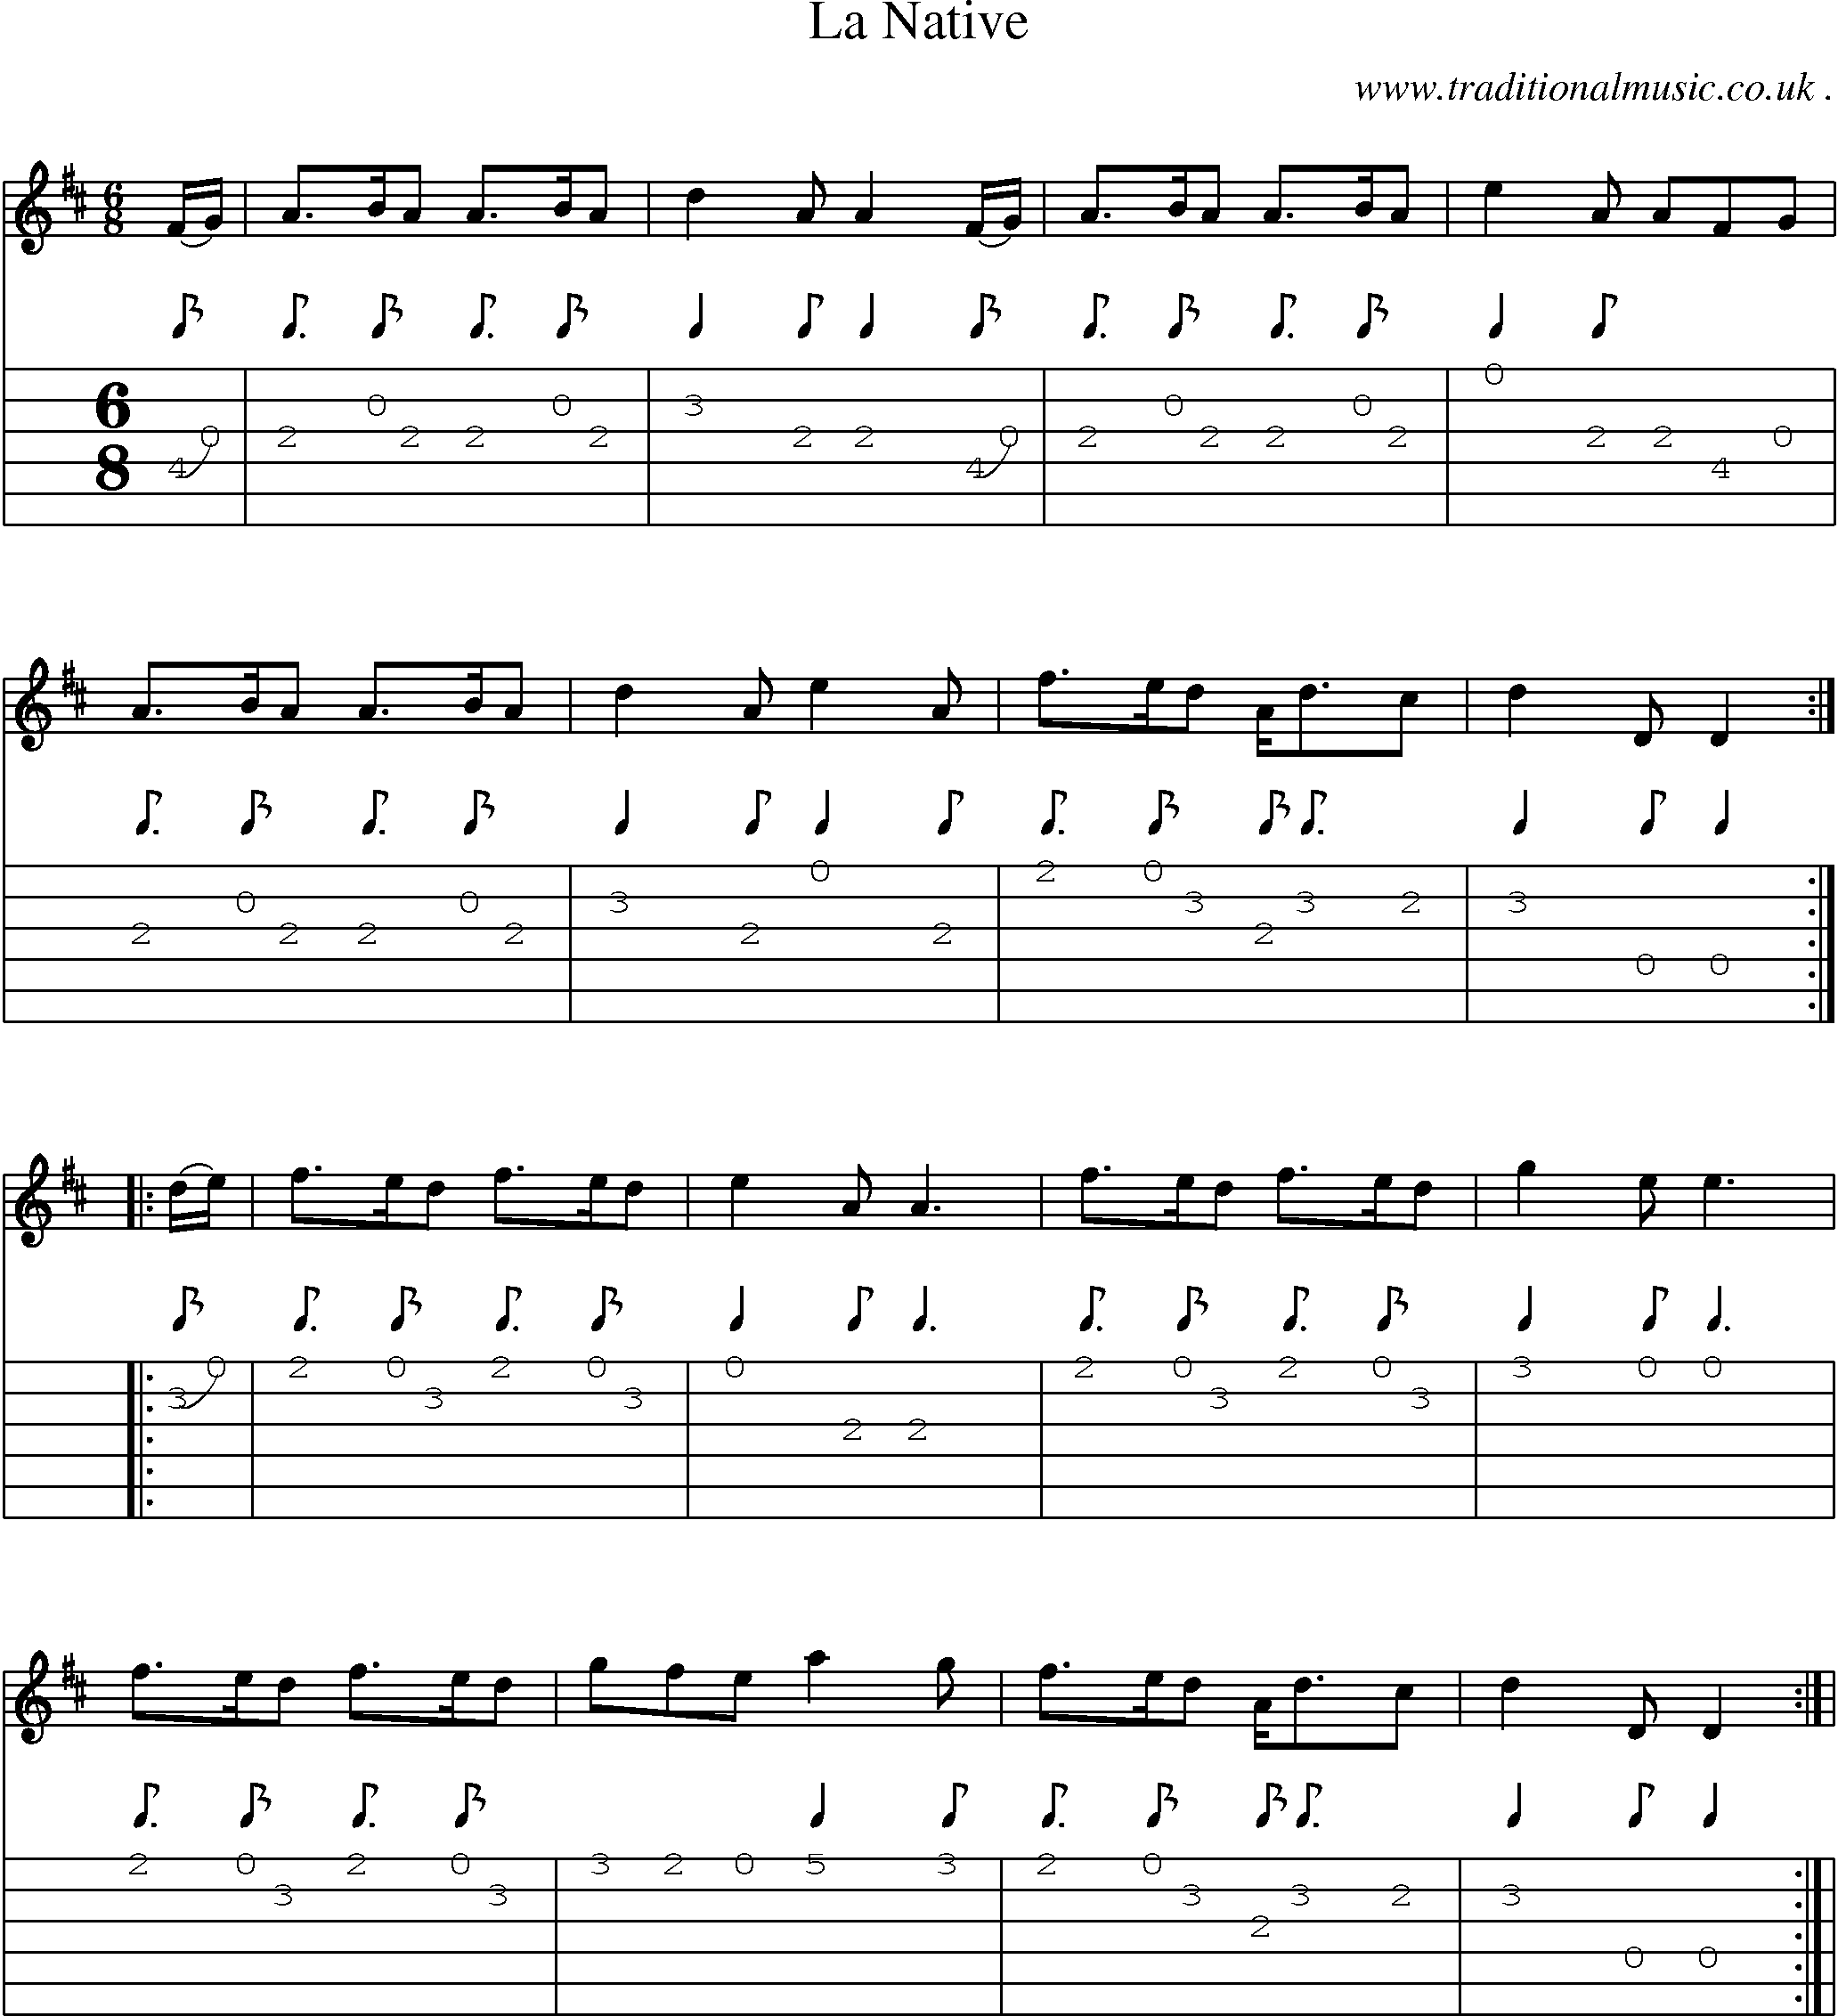 Sheet-Music and Guitar Tabs for La Native